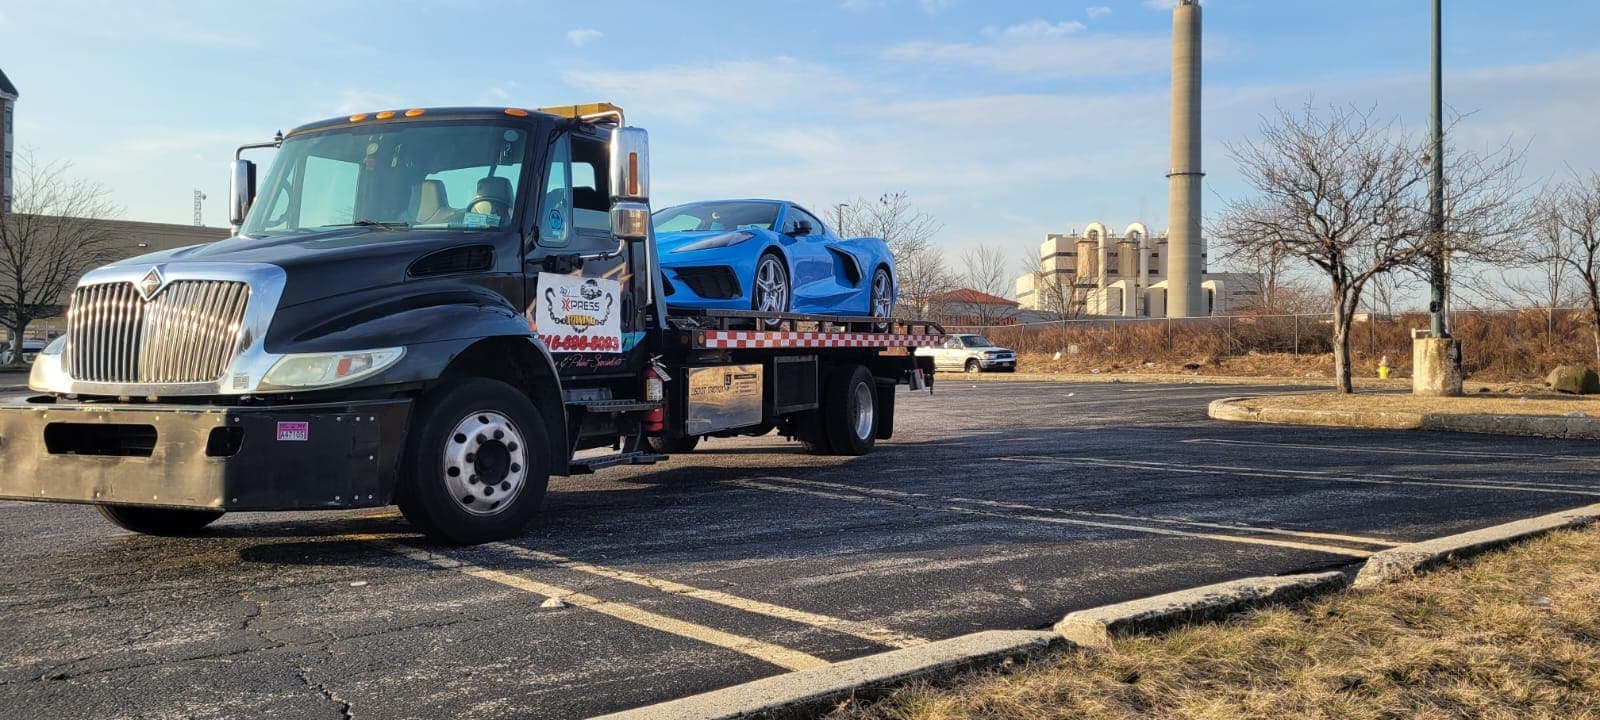 Xpress Towing - Hempstead, NY, US, affordable towing